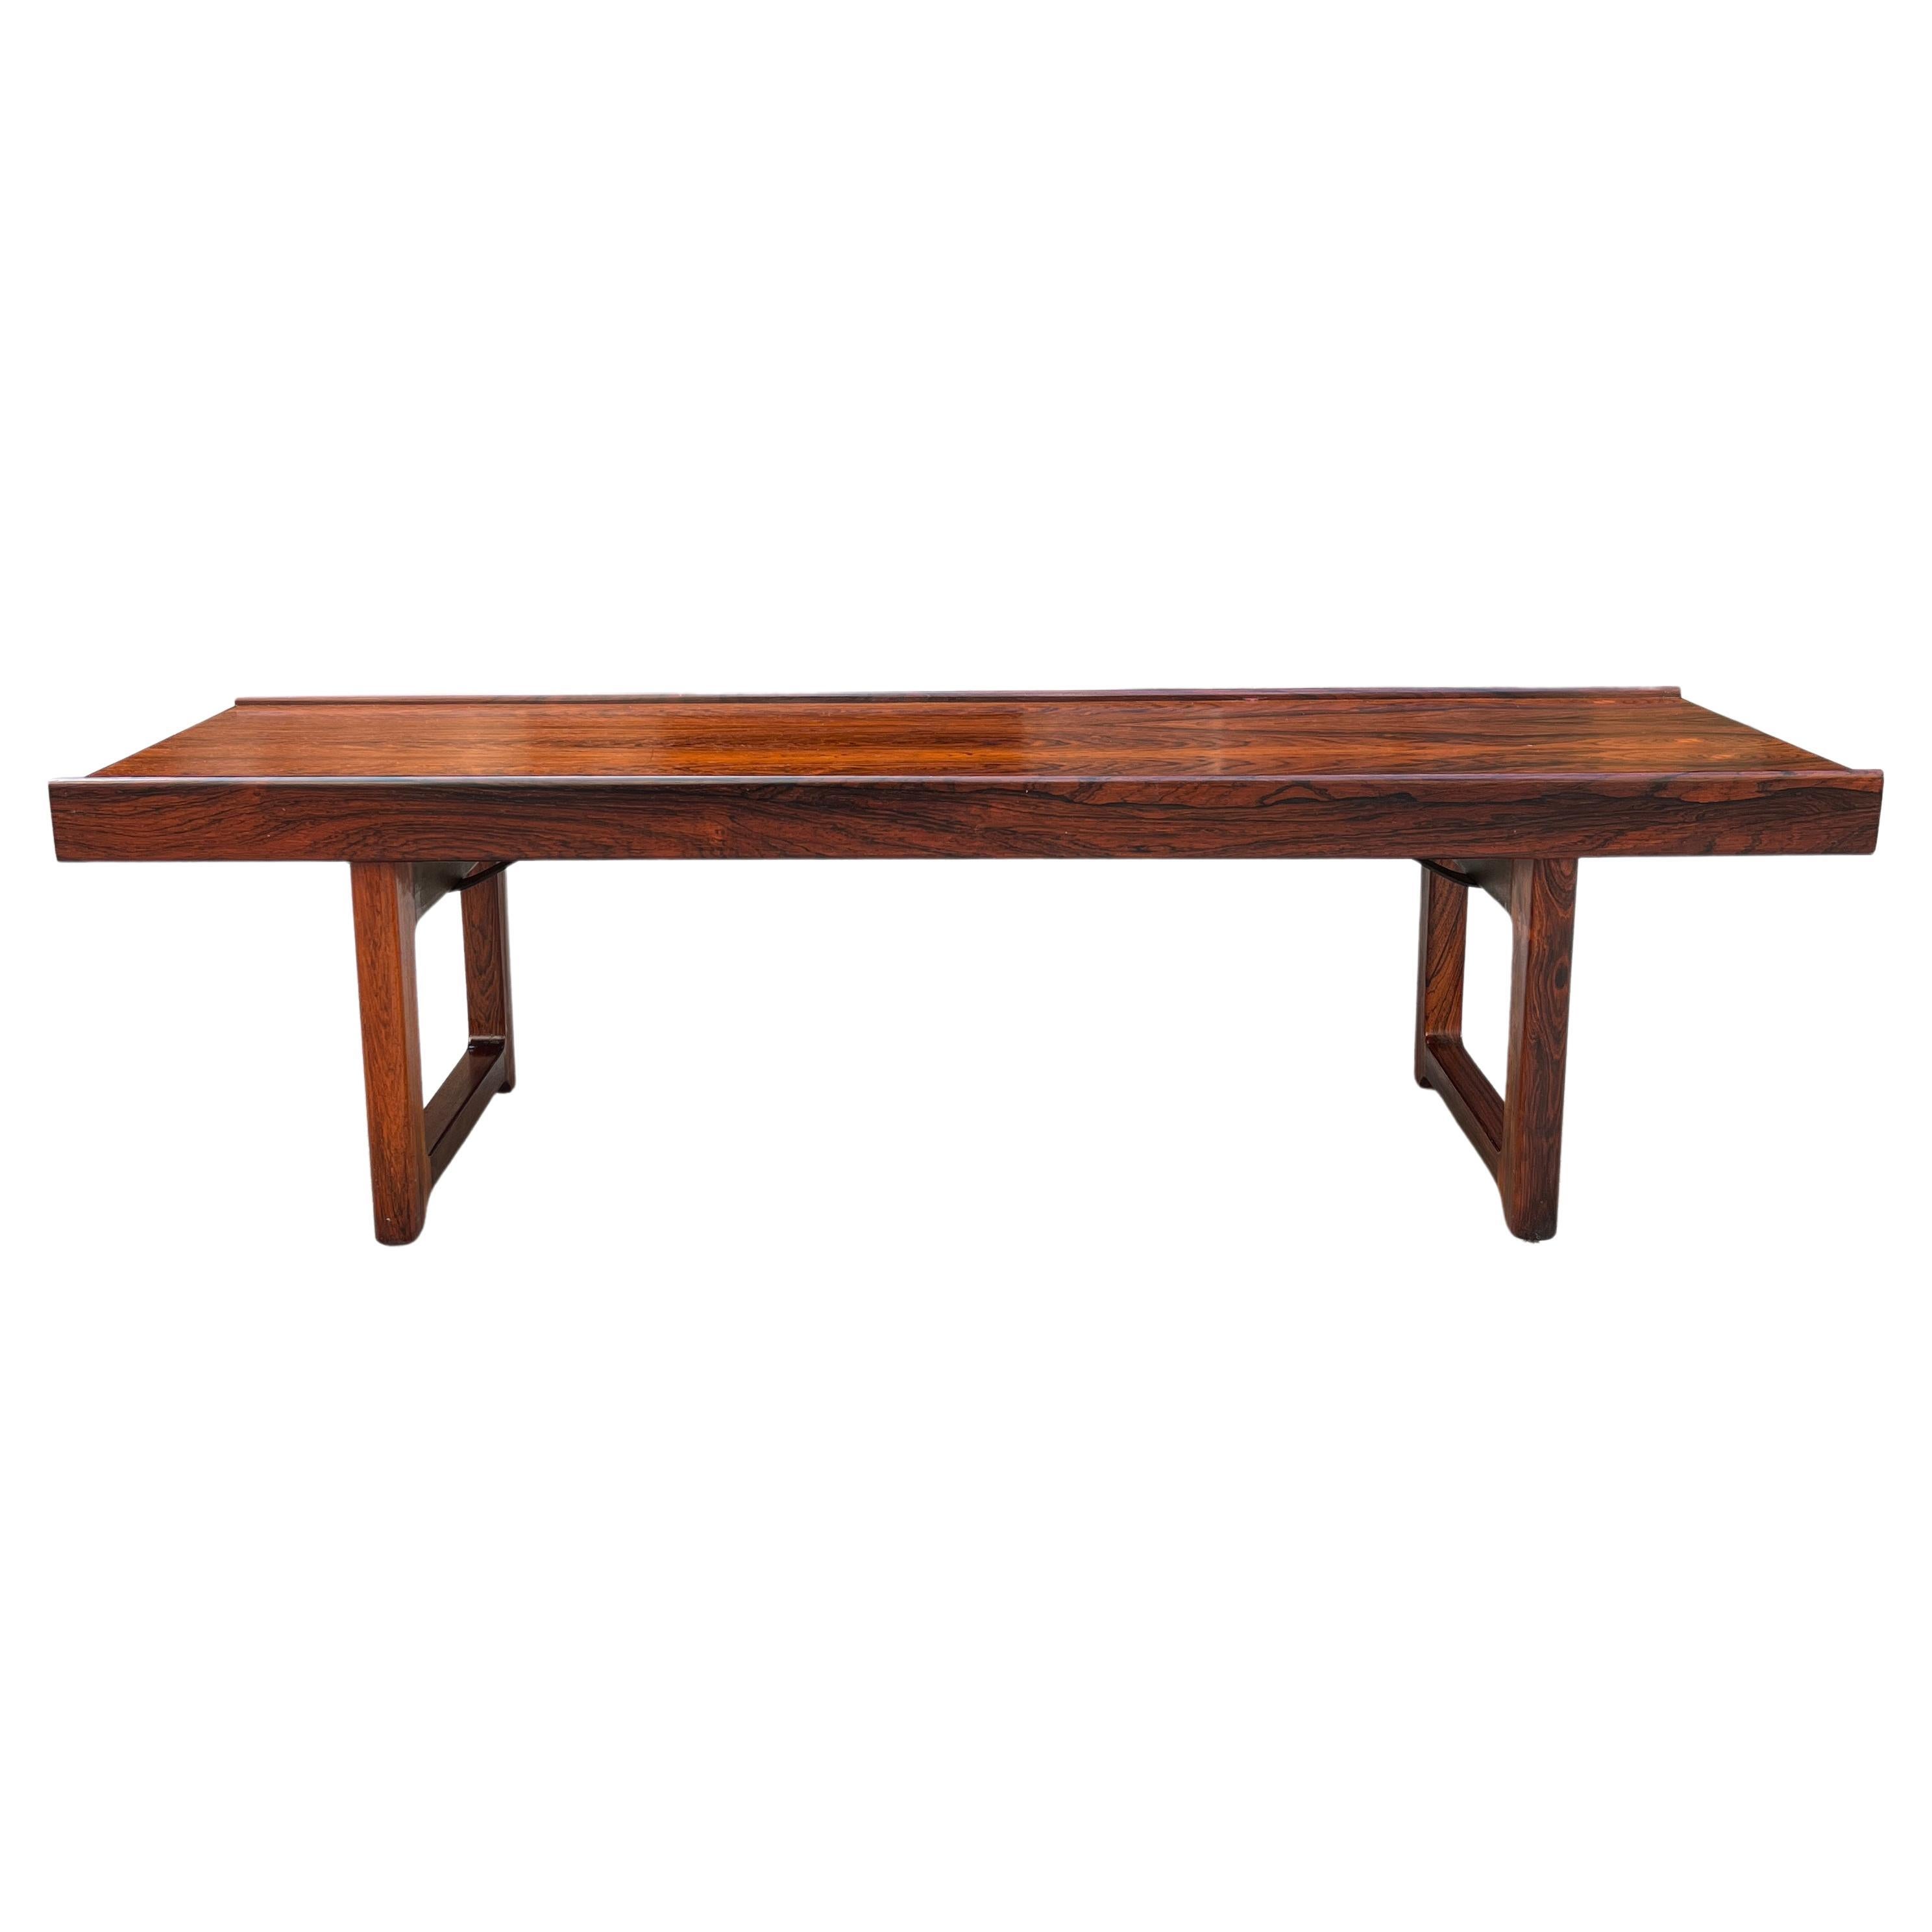 Mid-Century Scandinavian modern low coffee table / bench designed by Torbjørn Afdal for Bruksbo, Norway. This piece displays rich wood grains and sculpted edges. The perfect fit for an entryway piece or bedroom seating. A sleek rosewood “Krobo”